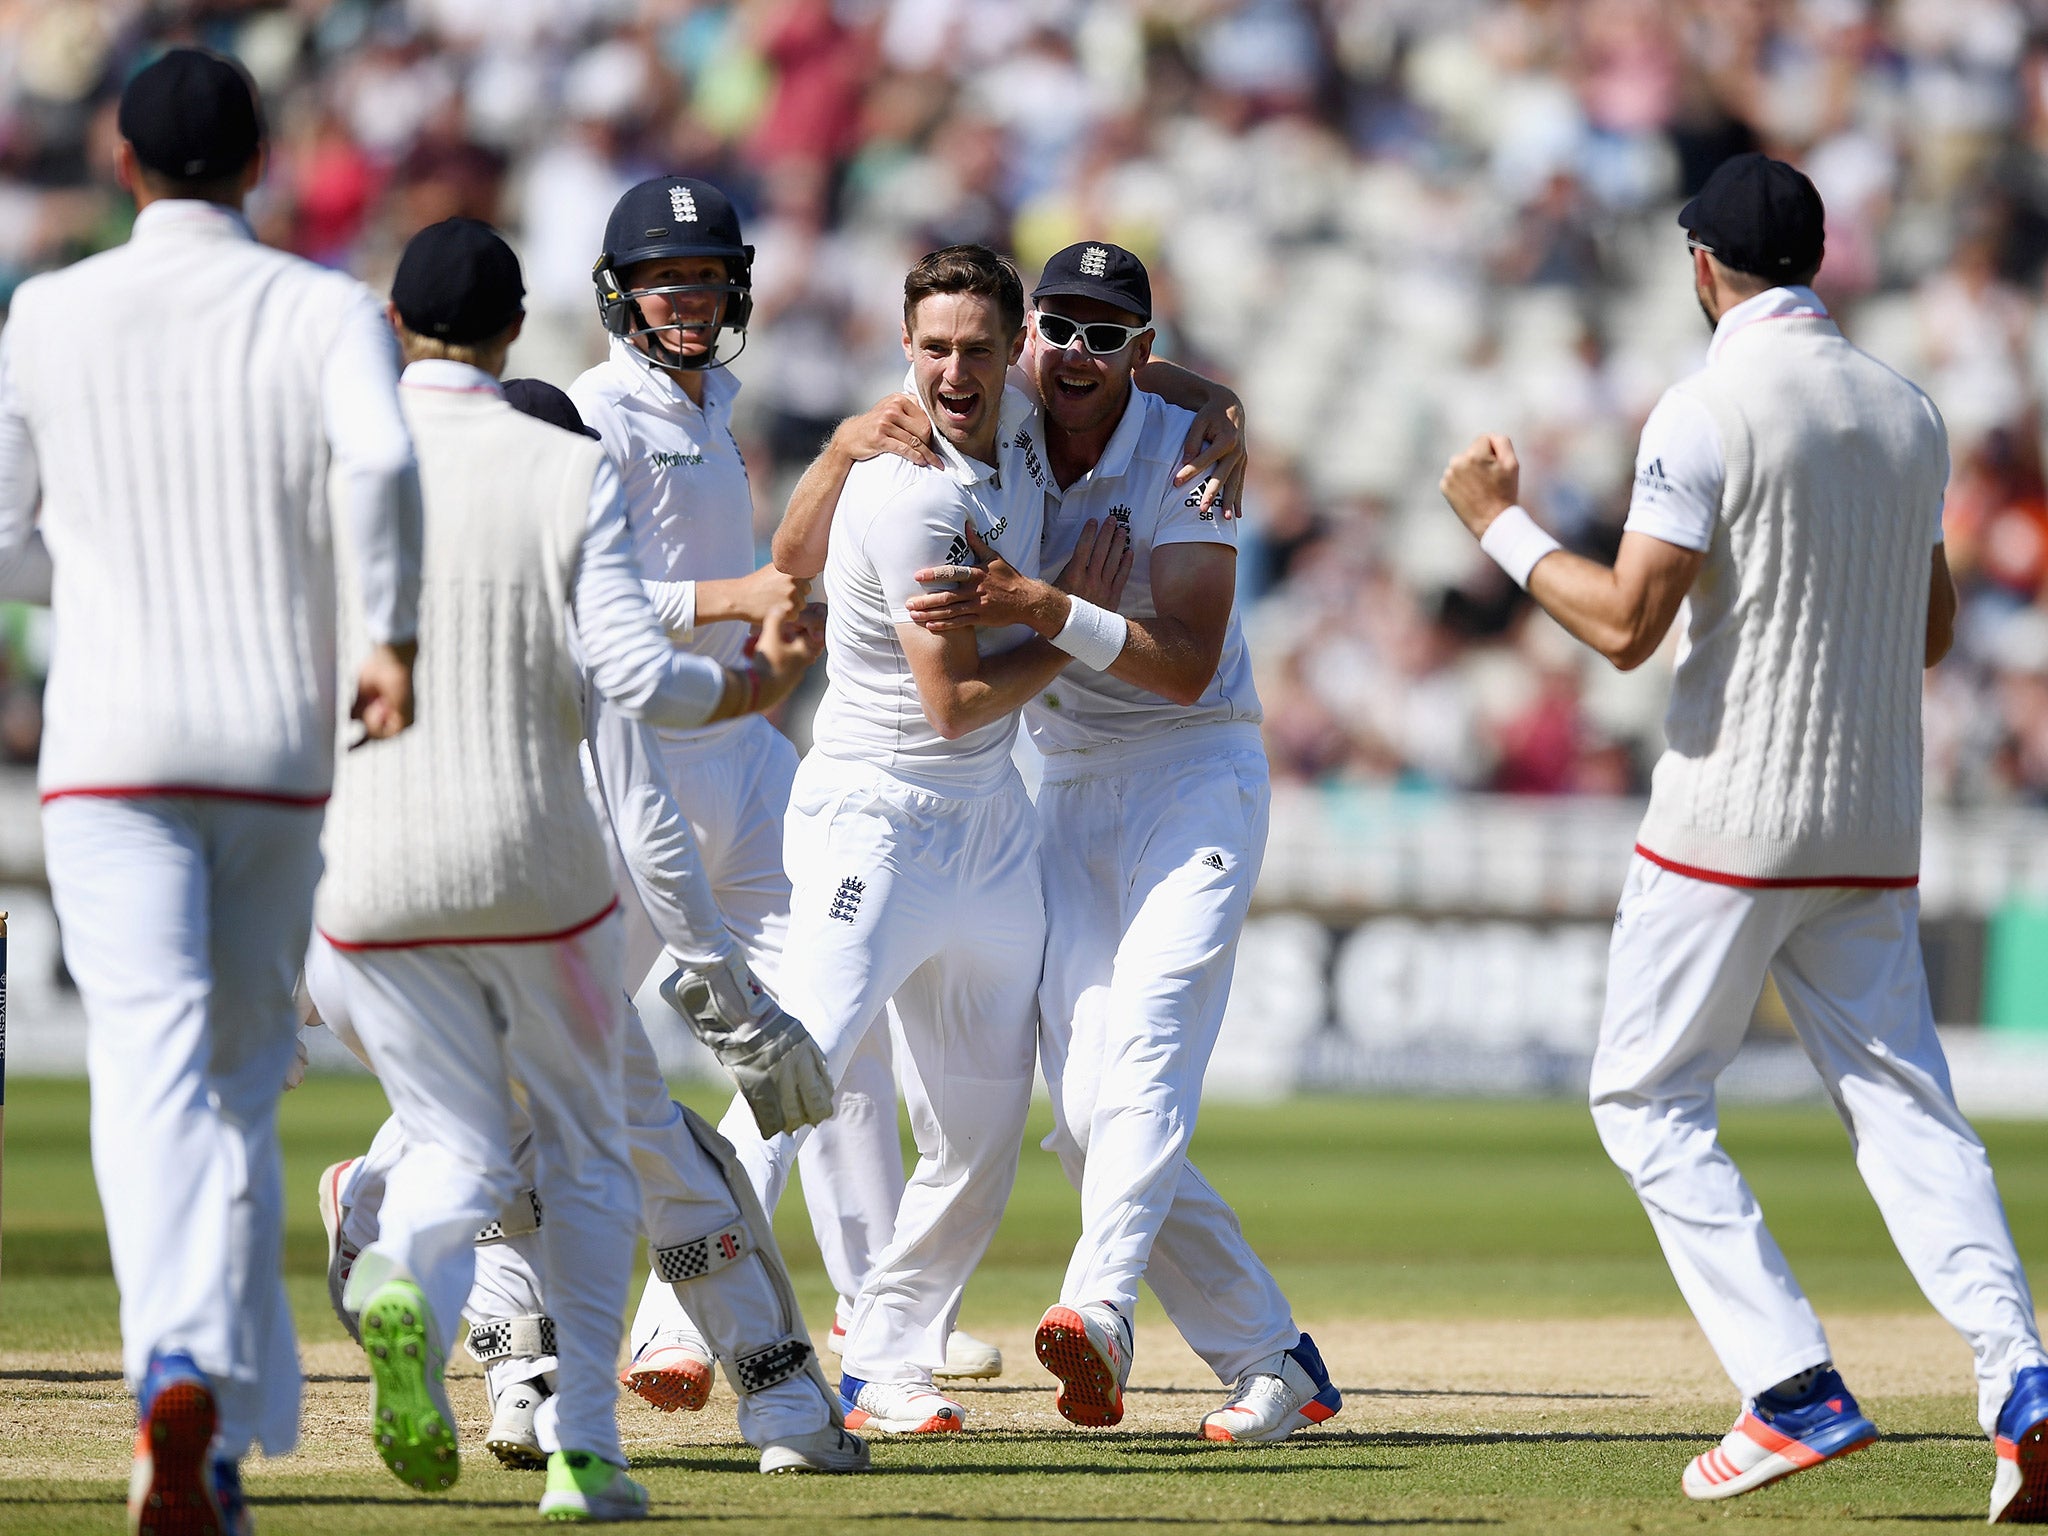 Chris Woakes celebrates after taking a wicket on the final day of the Test this summer against Pakistan